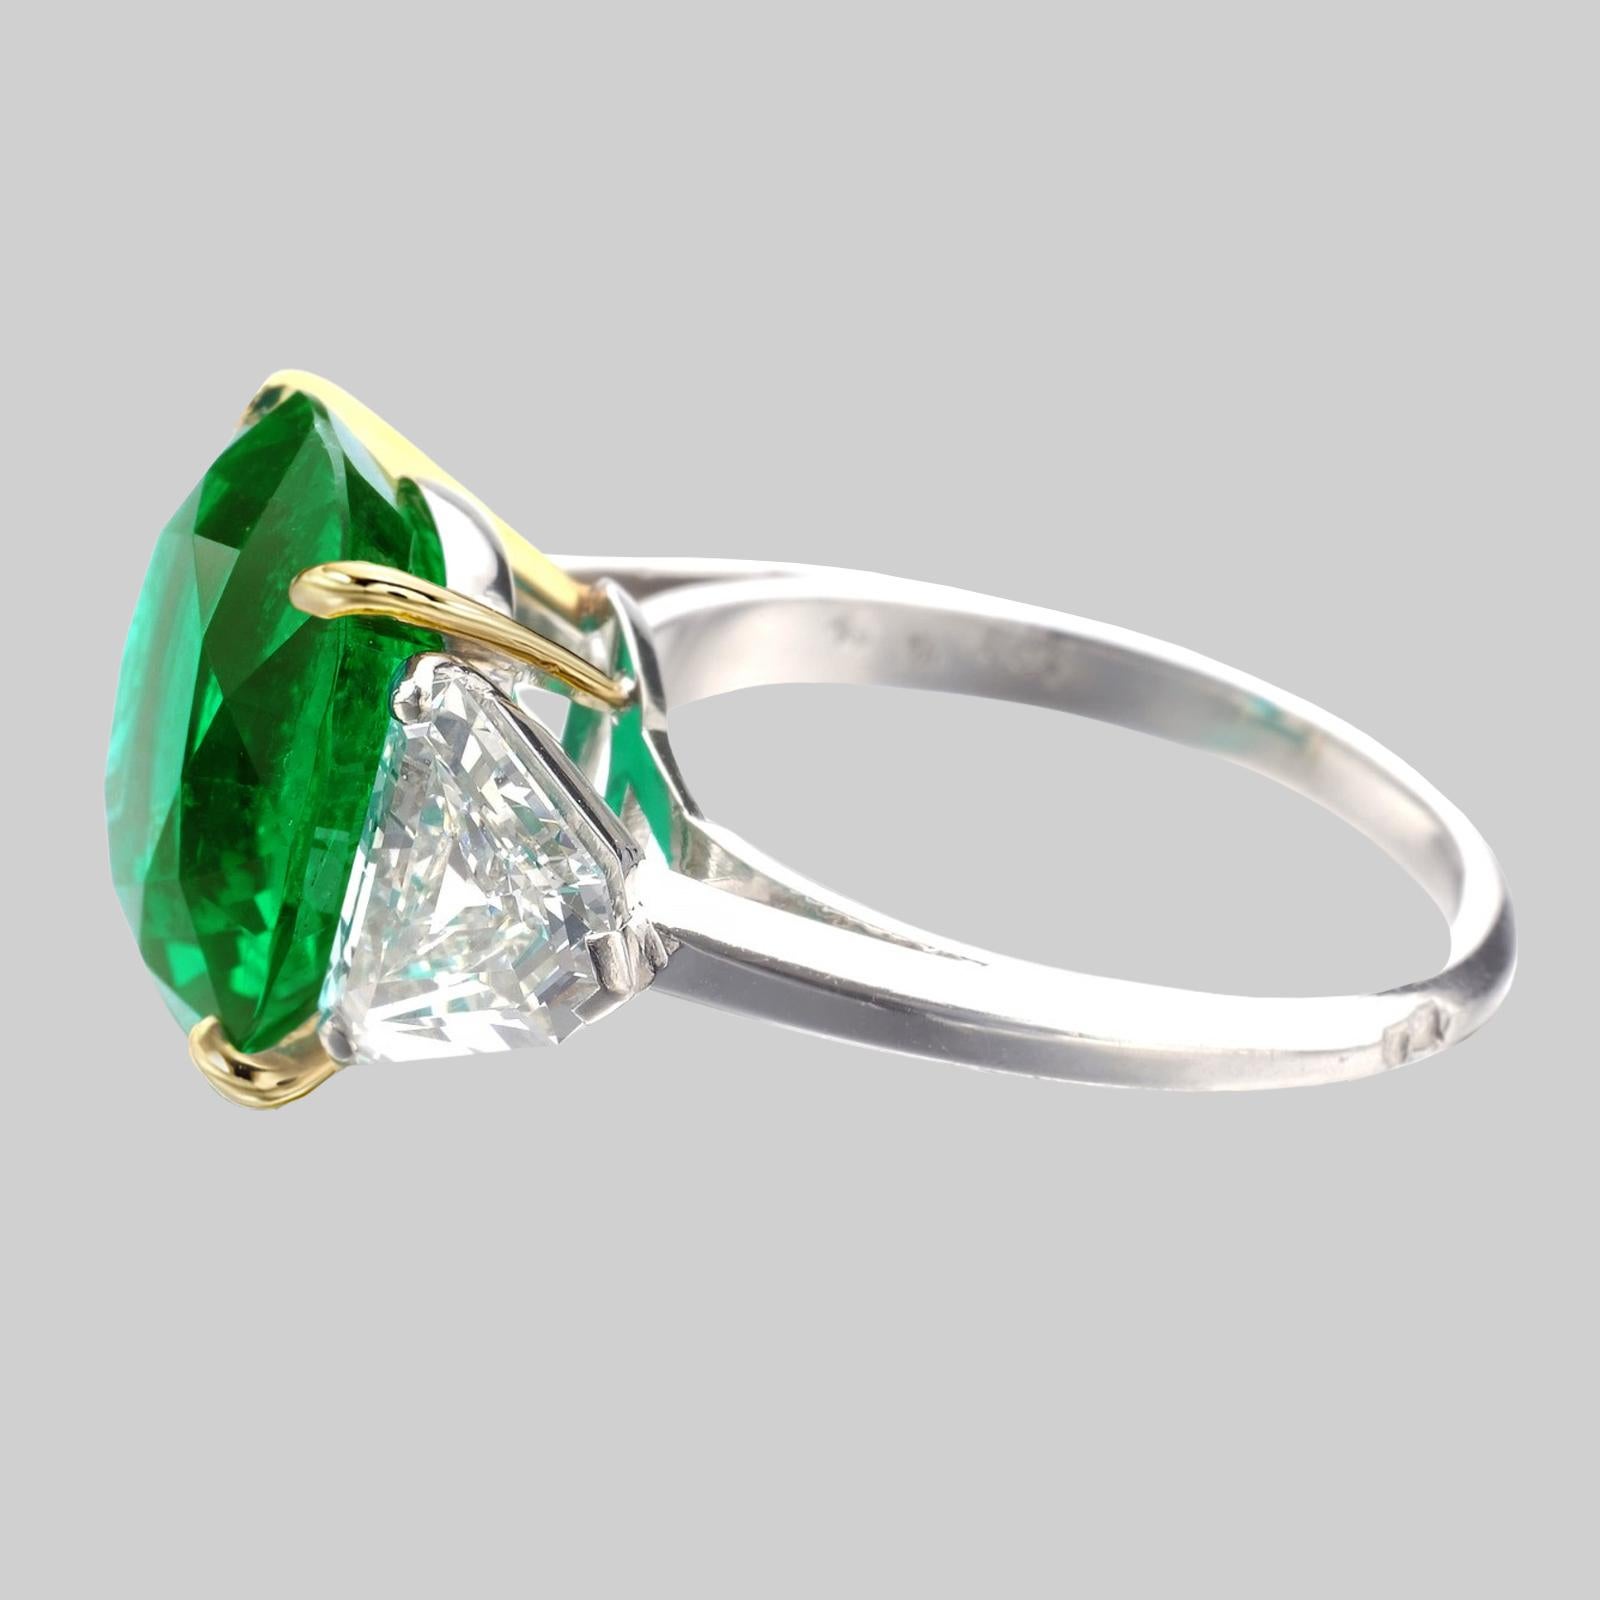 from the famed Muzo Mines of Colombia: a Natural Emerald of unparalleled beauty.

With a substantial weight of 3.25 carats, this gem boasts dimensions of 9.95 x 8.14 x 6.12 mm, expertly shaped into a mesmerizing Cushion cut.

Each facet of this